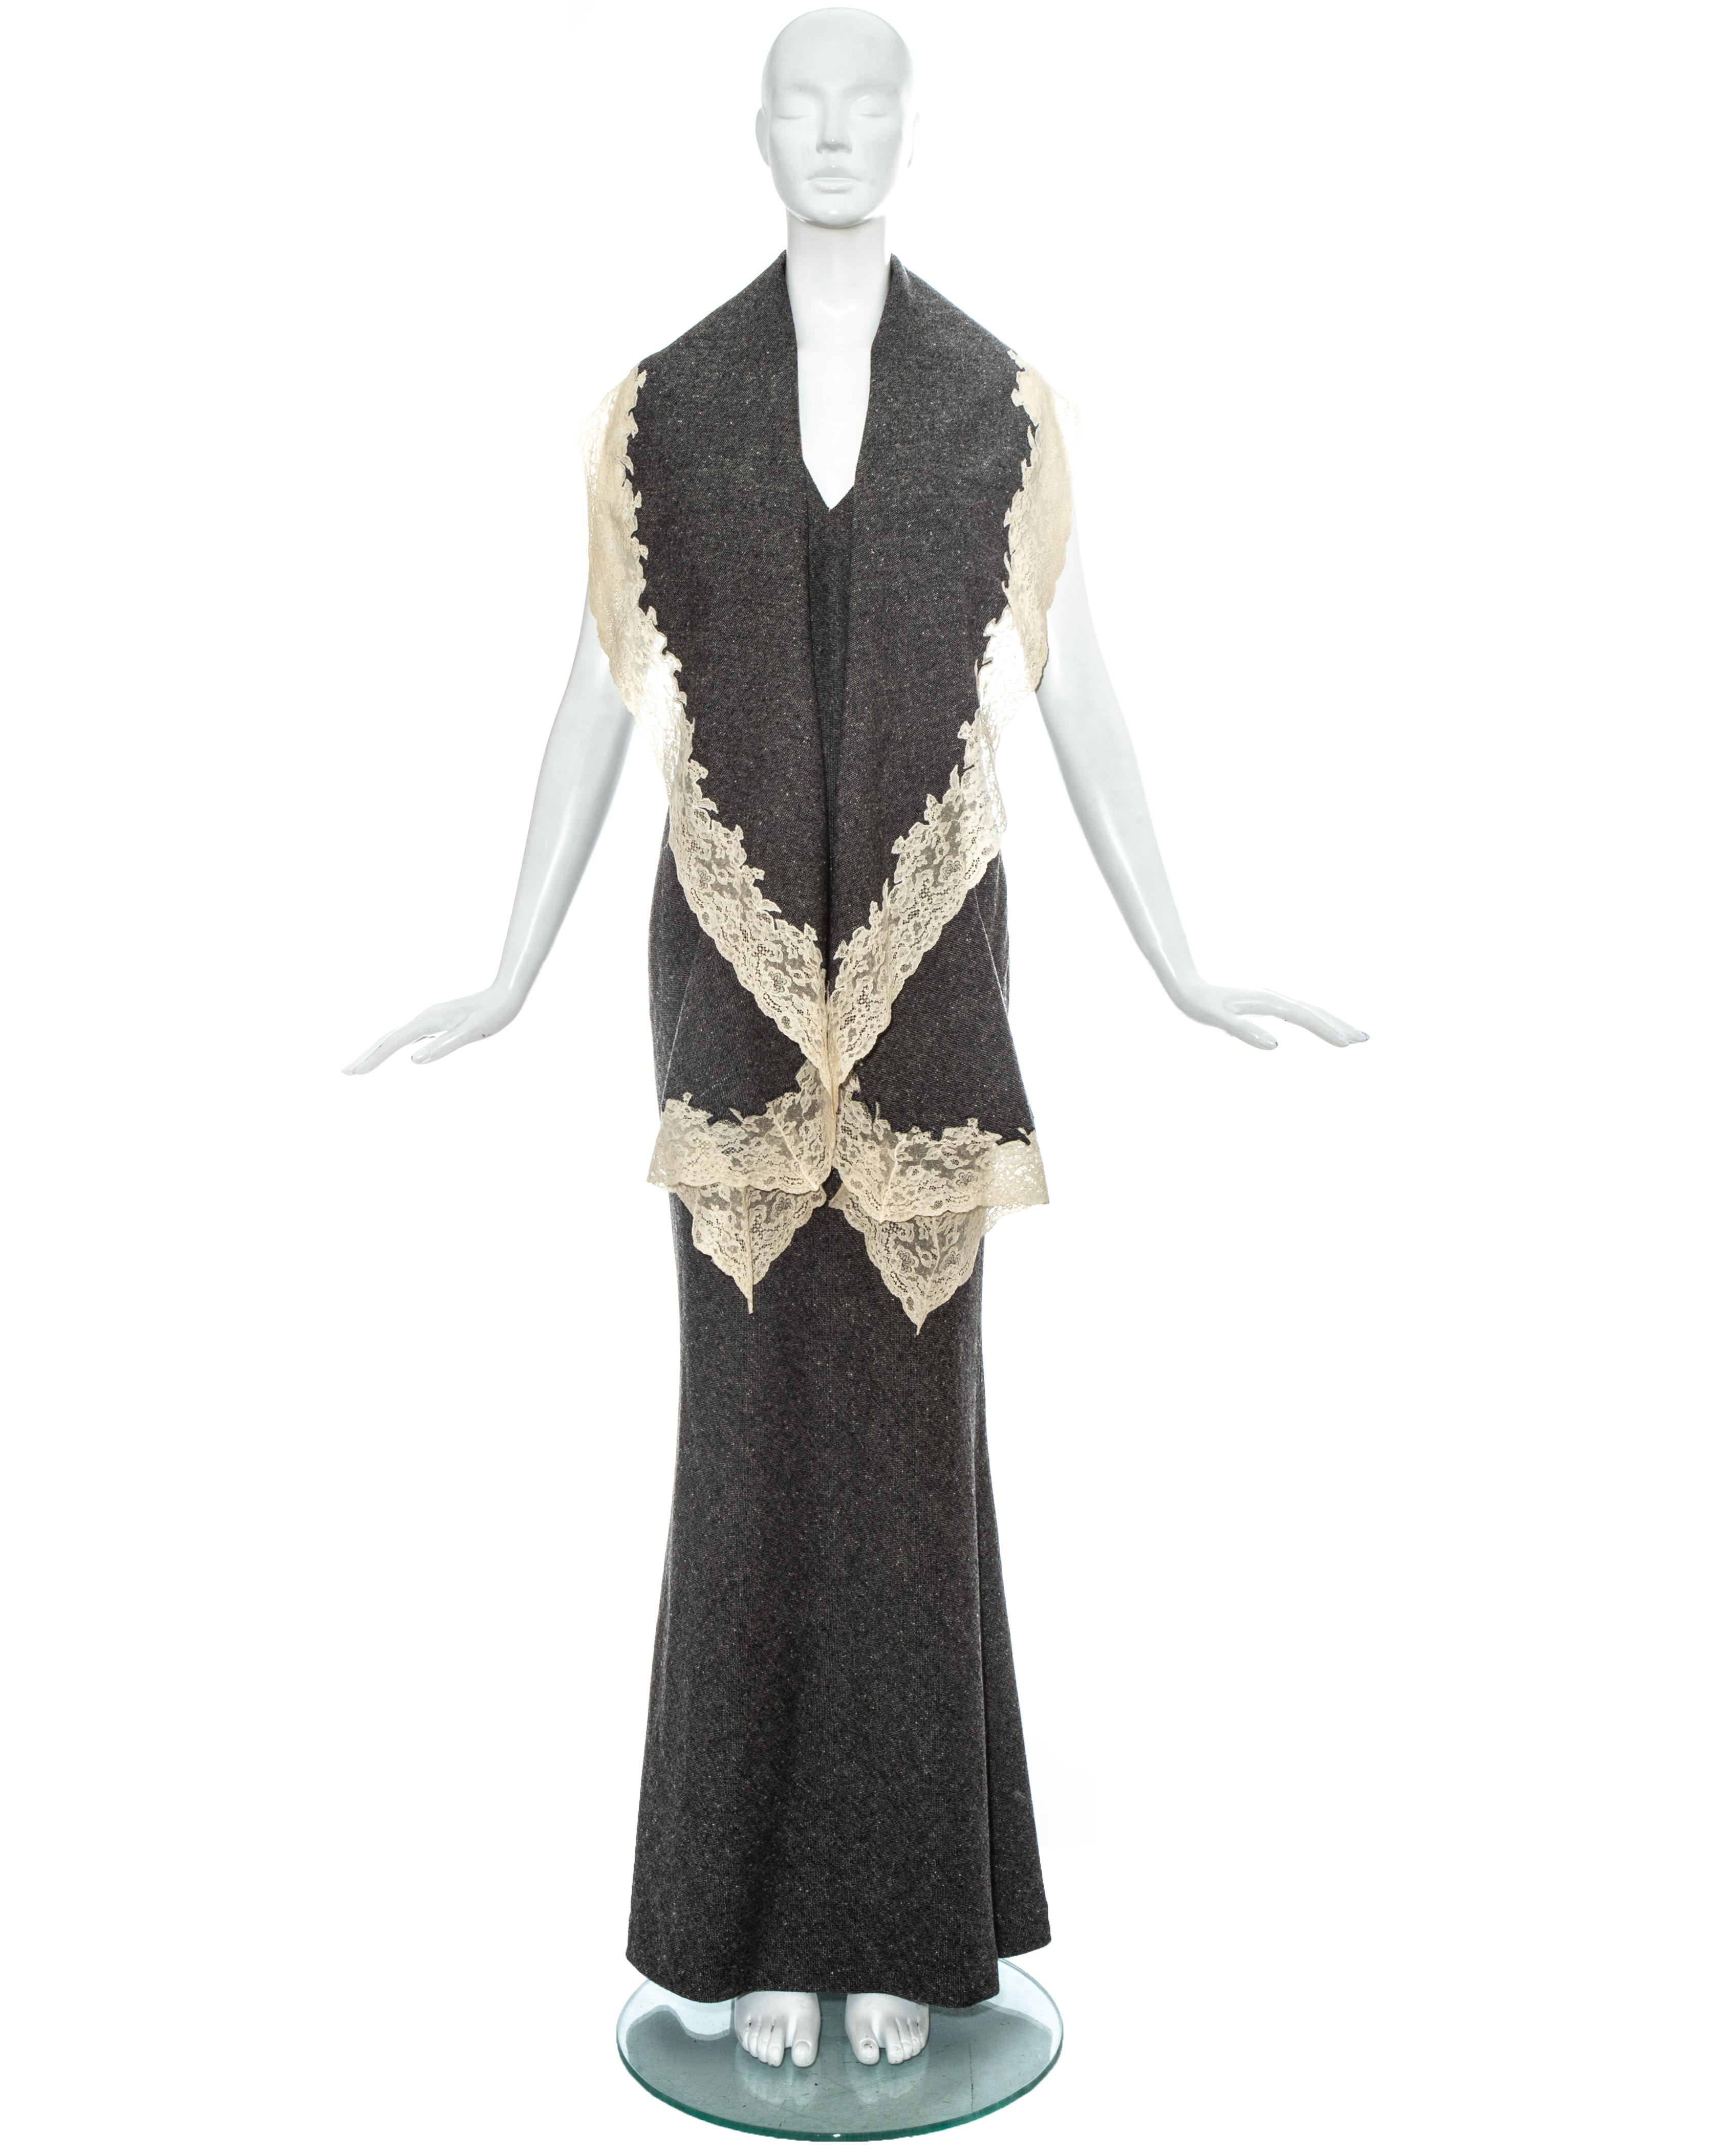 Christian Dior by John Galliano grey tweed wool maxi dress with open back and large shawl with cream lace trim attached from the halter neck. Can be styled in multiple ways.

Fall-Winter 1998